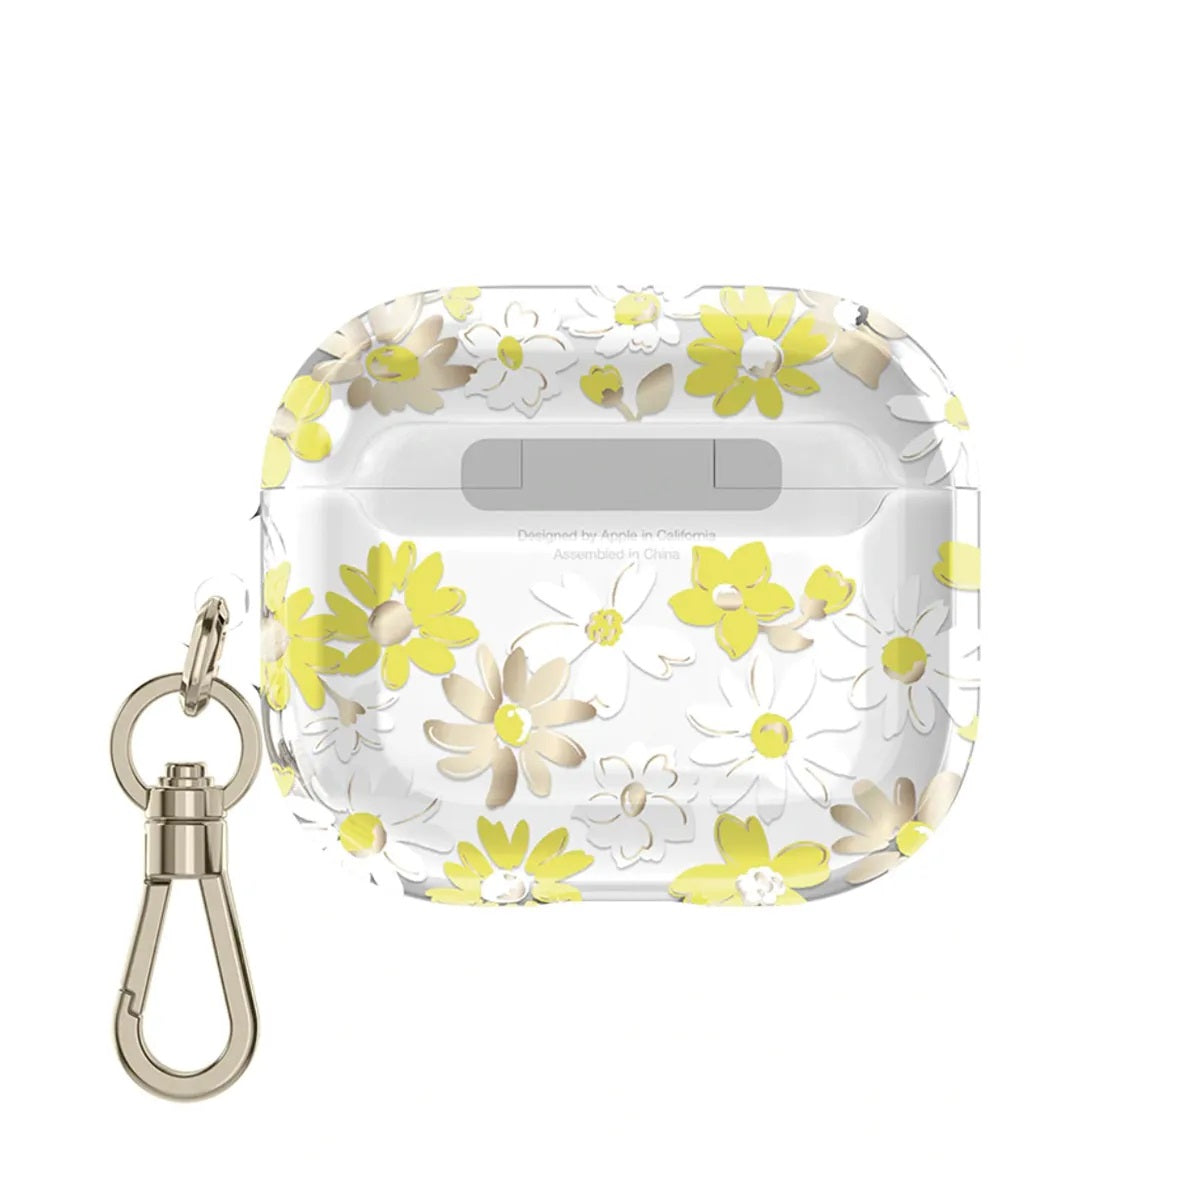 Kate Spade New York Protective AirPods Pro Case (Yellow Floral Medley/Flax Stone/White/Clear/Gold/Gold Logo)